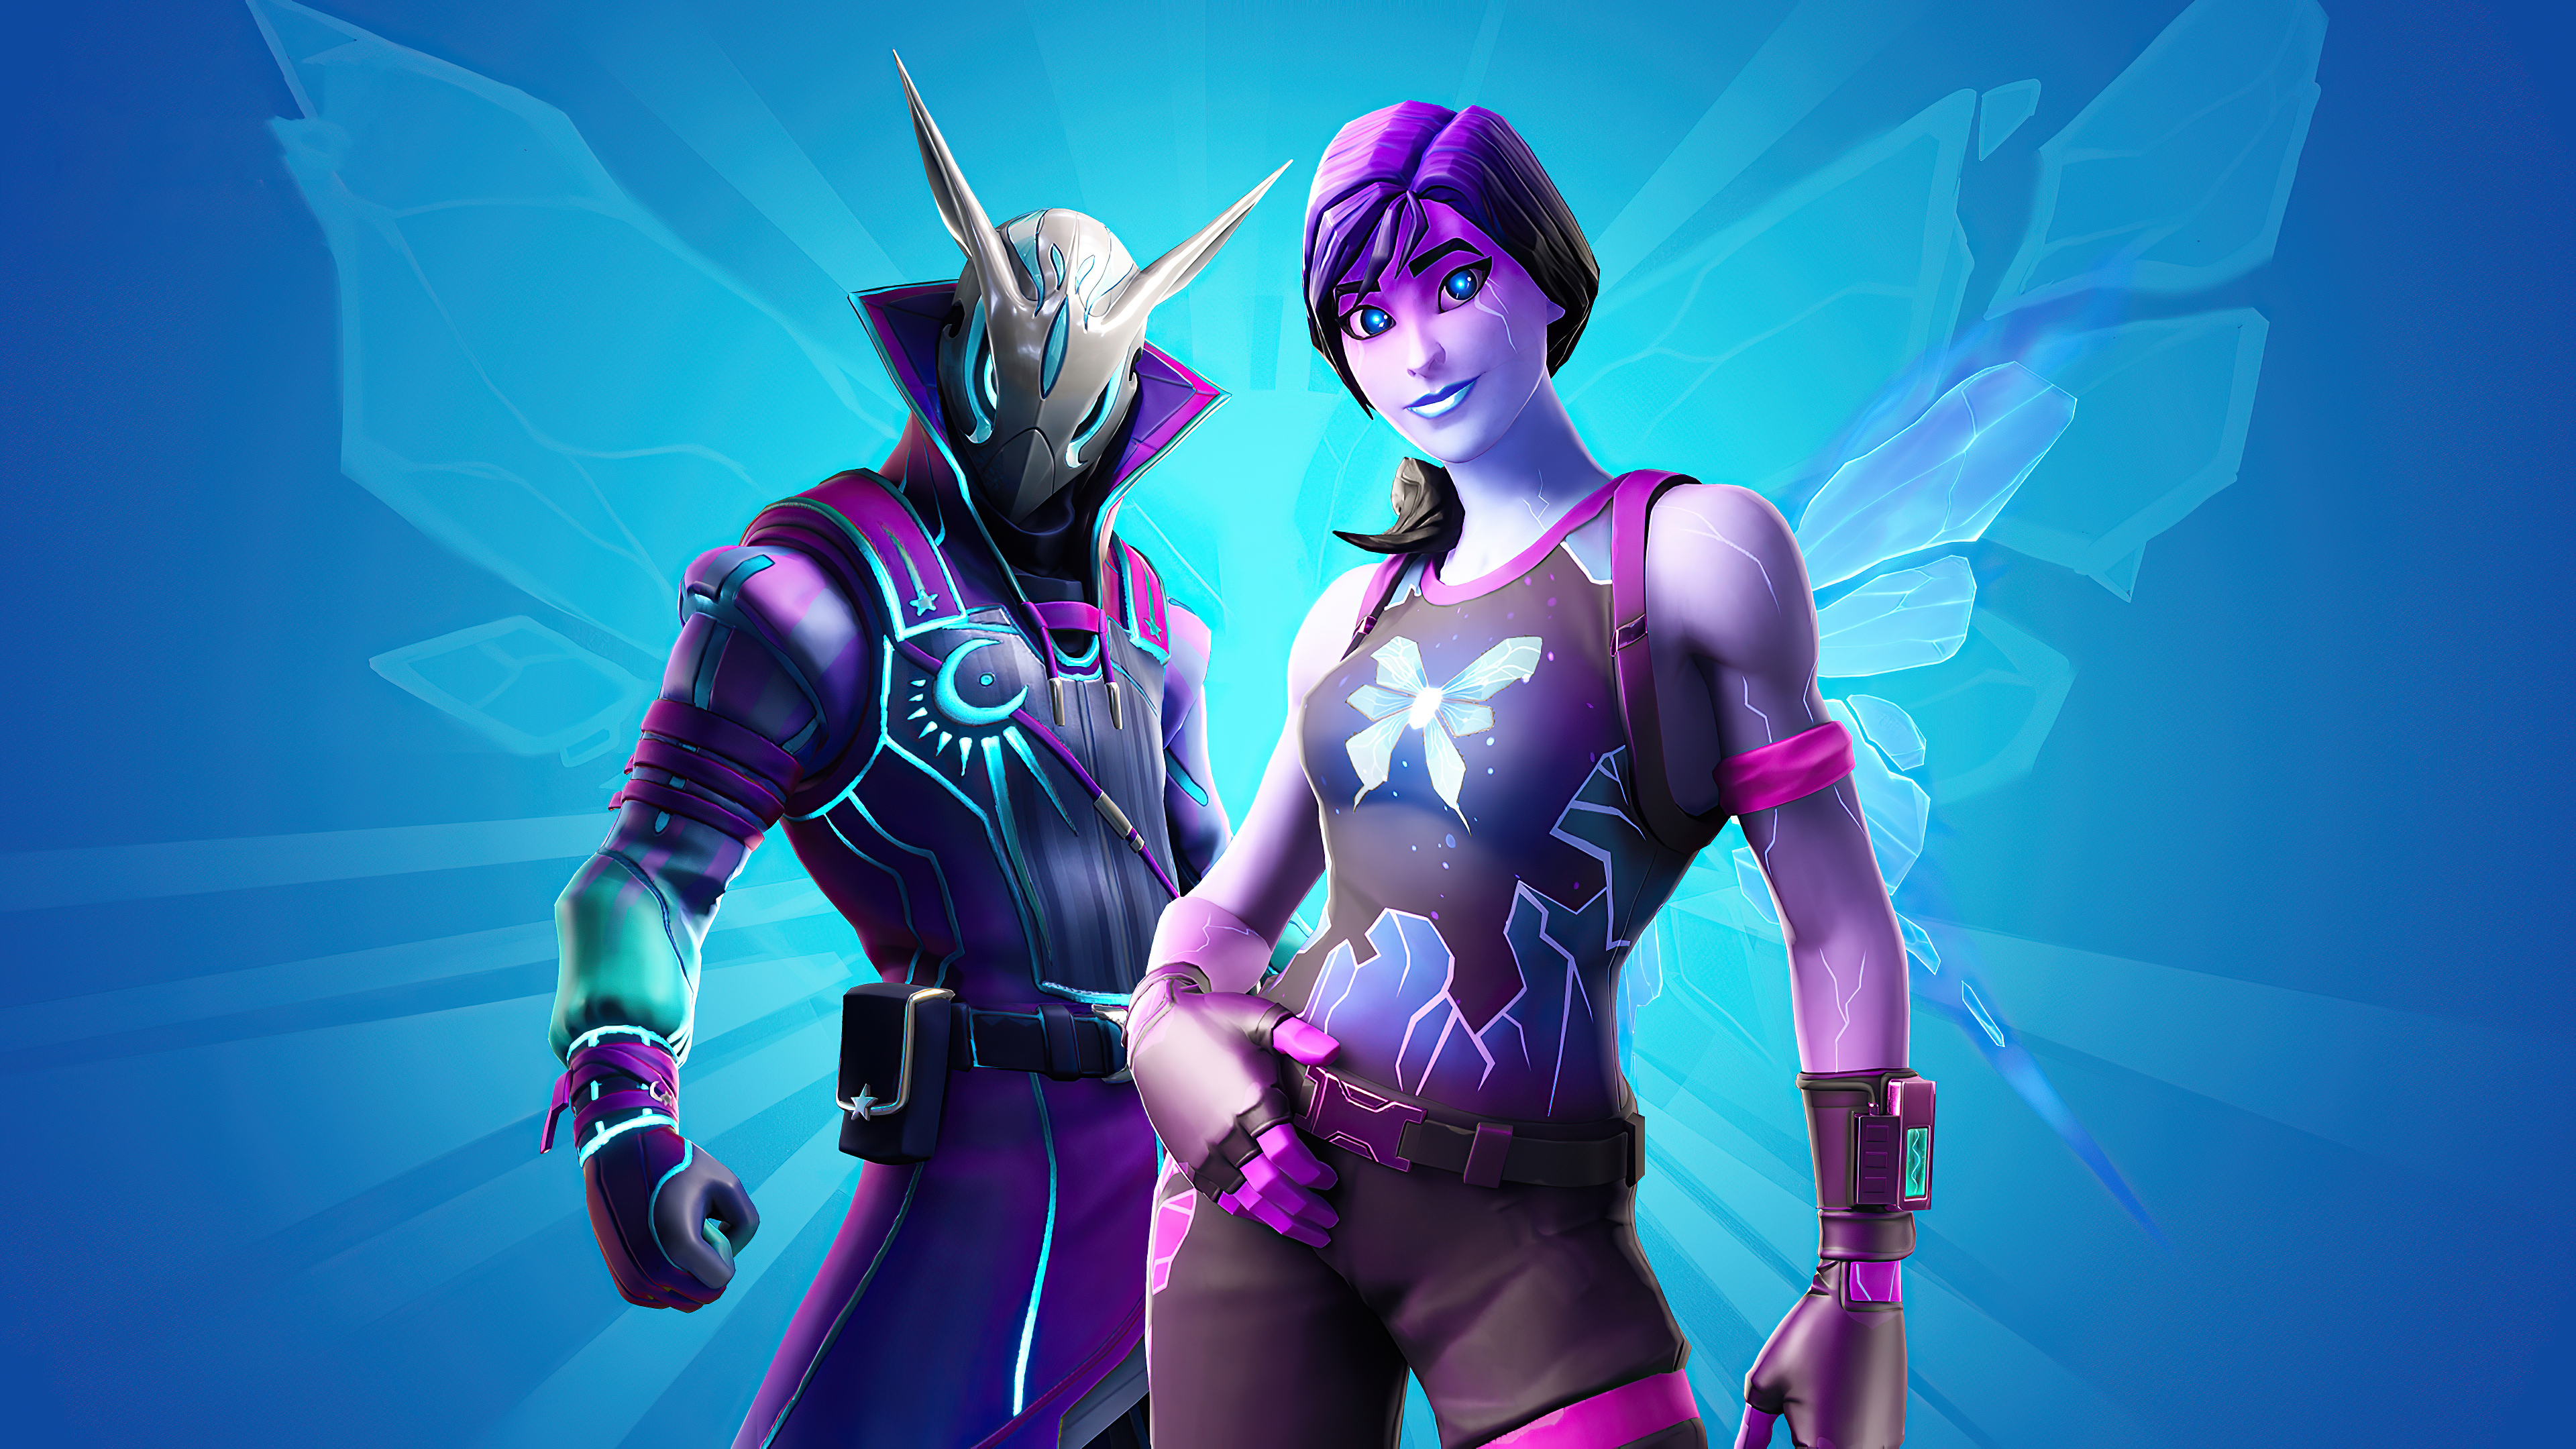 1100+ Fortnite HD Wallpapers and Backgrounds